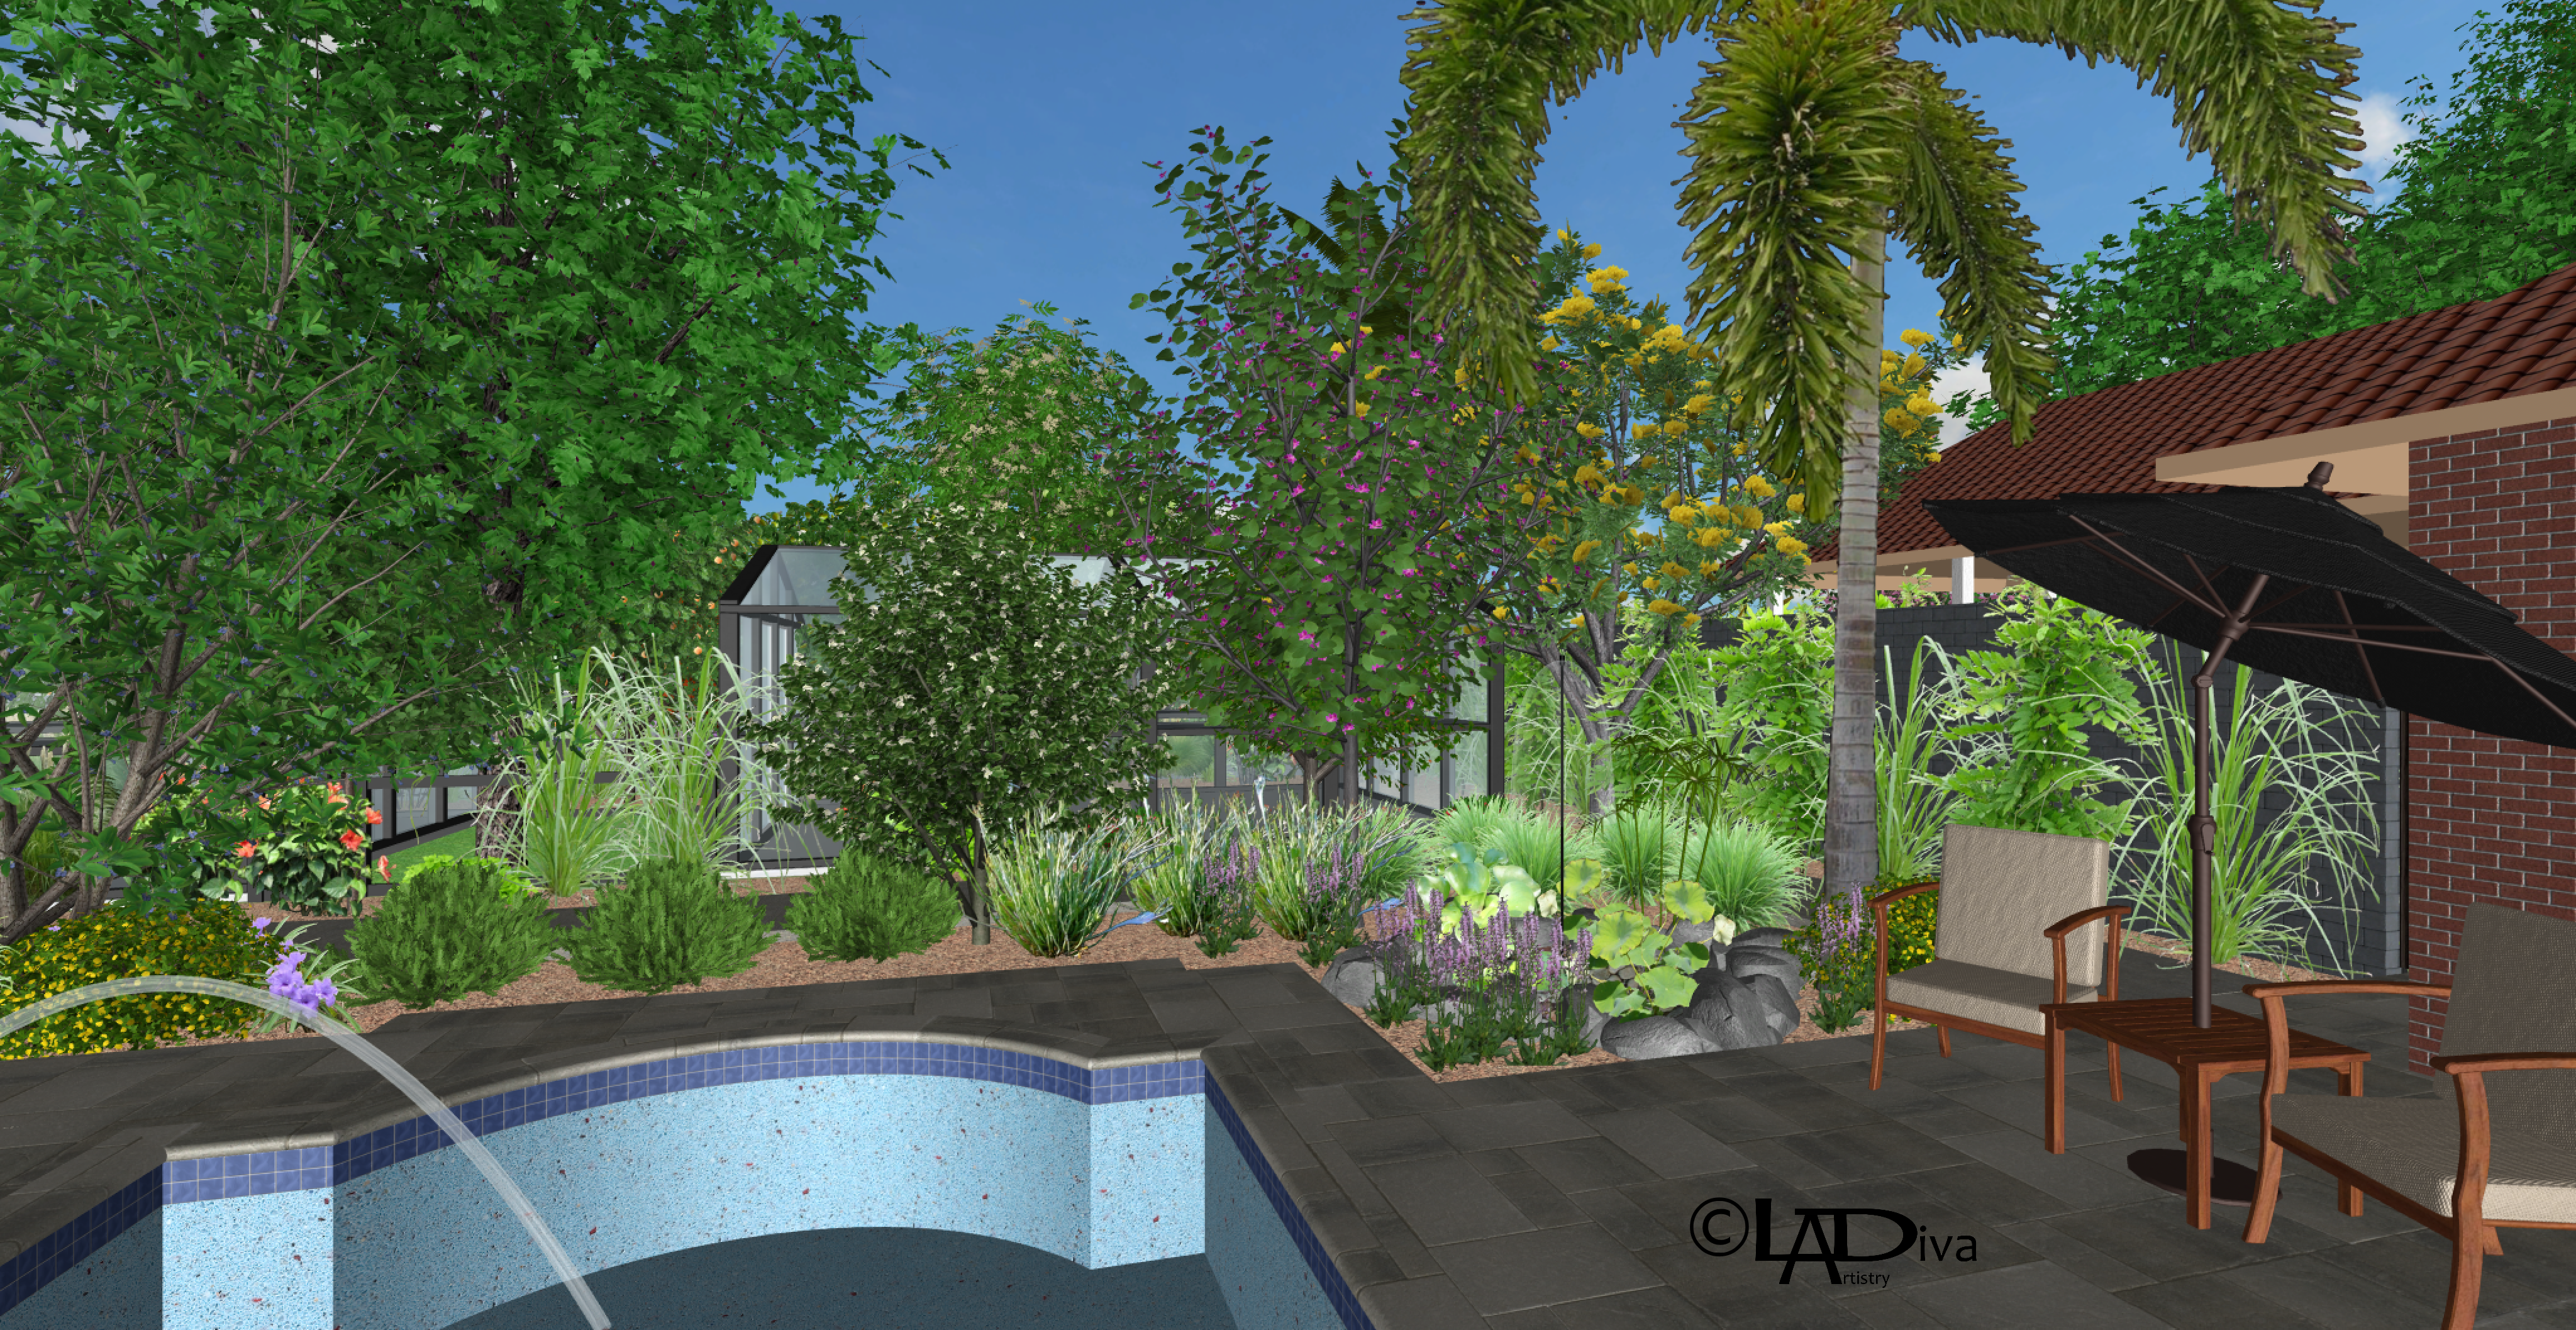 Asian Zen Garden & Animal Sanctuary with New Pool Build - Phoenix, AZ ©LADiva Artistry Landscape Design Solutions, specializing in edible & tropical garden design in Gilbert, AZ. Featuring Custom 2D Color Master Landscape Design Plans and 3D Virtual Walkthrough Tours. Cultivating beautiful, productive oases in the greater Phoenix, Arizona area showcasing tropical trees, fruit trees, edible plants & herbs in low maintenance, stunning gardens.